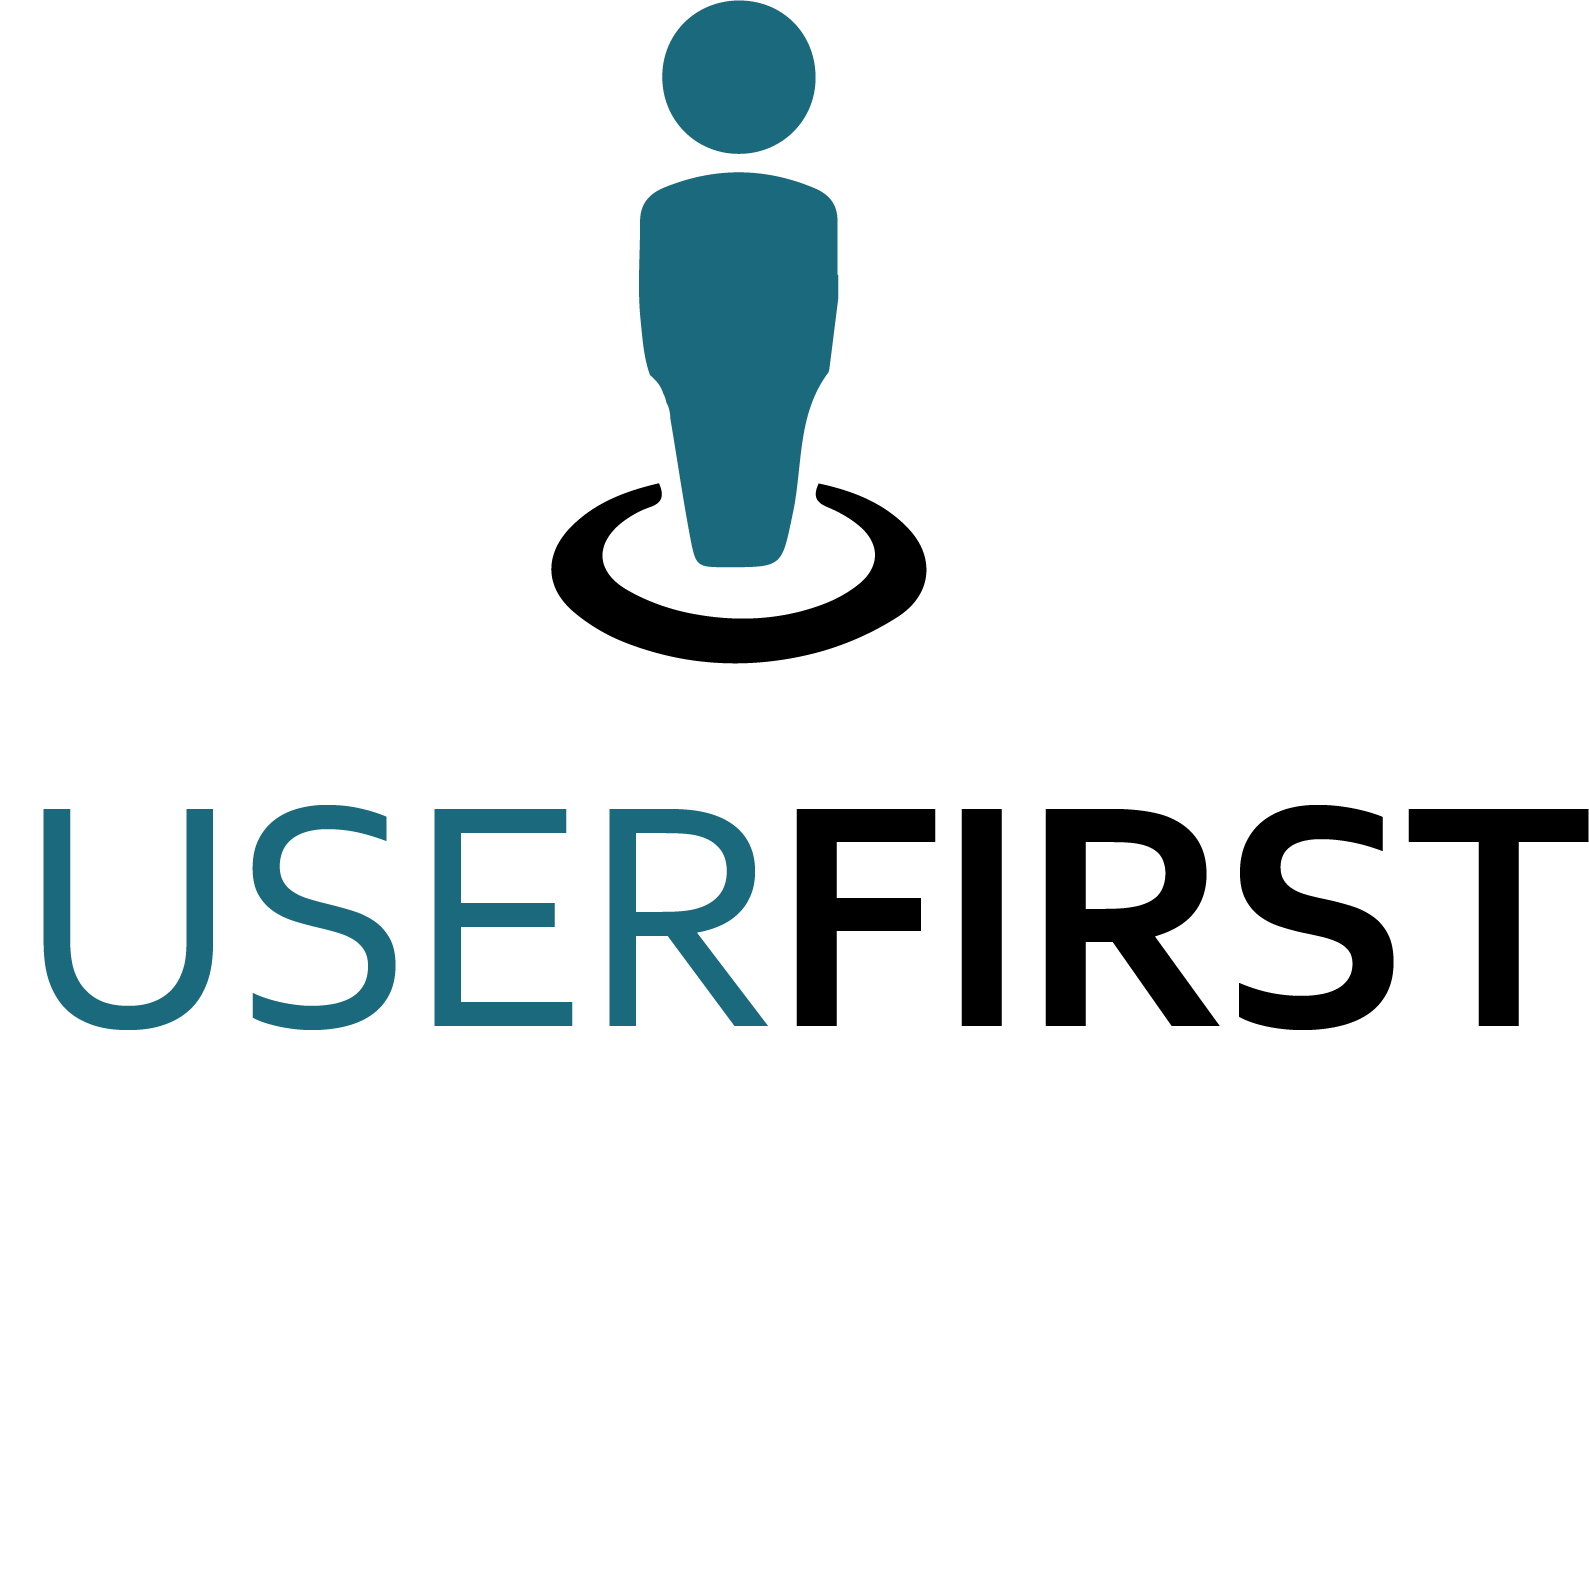 userfirst.png